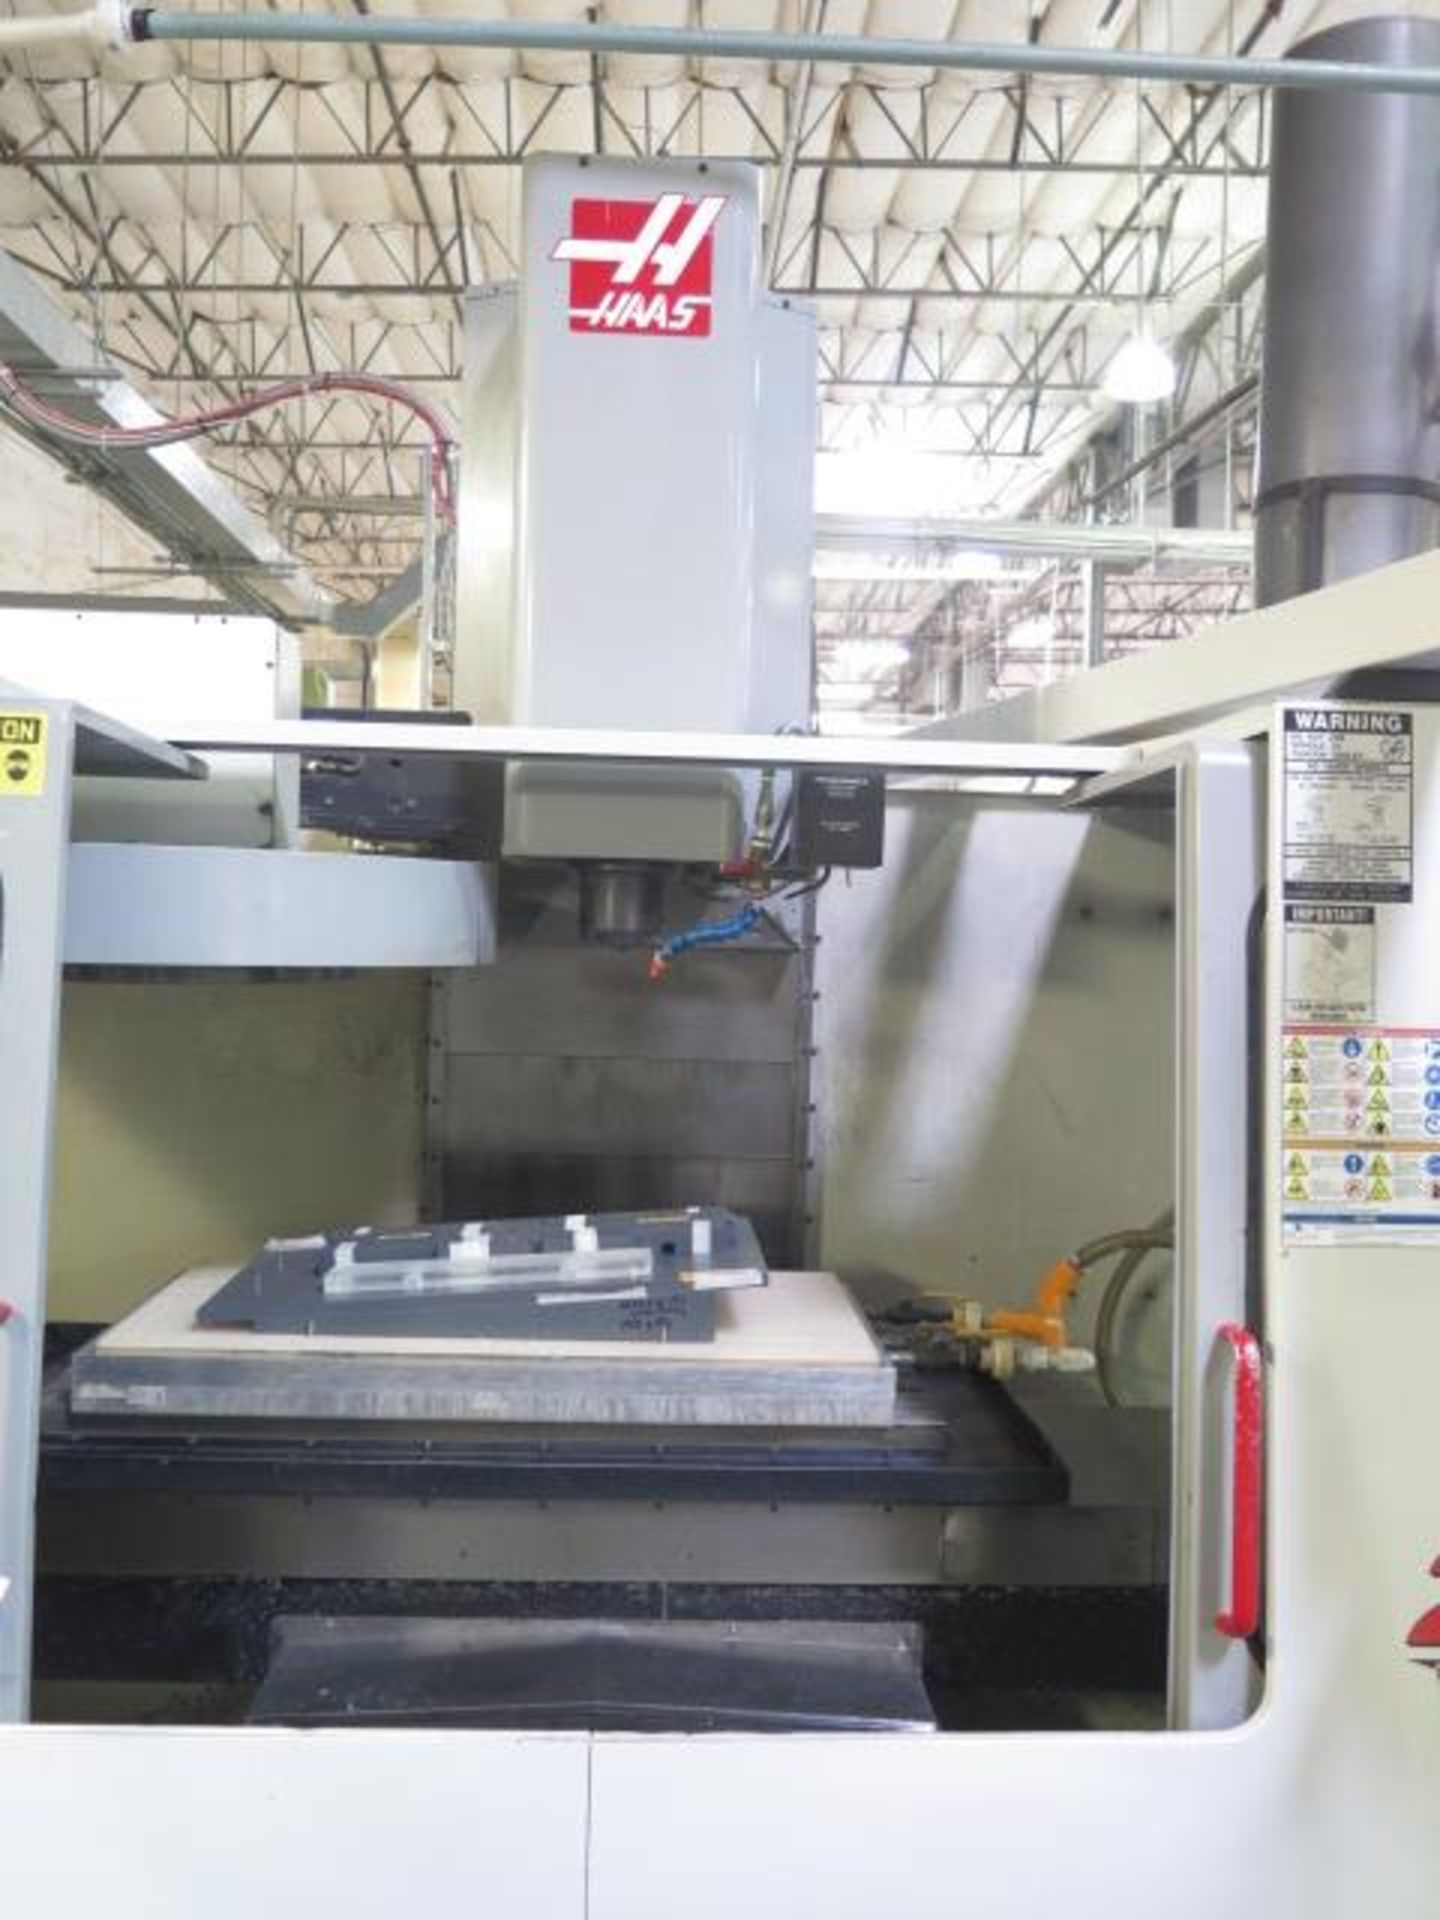 1999 Haas VF-3 4-Axis CNC Vertical Machining Center s/n 18341 w/ Haas Controls, 32-Station ATC, - Image 4 of 16